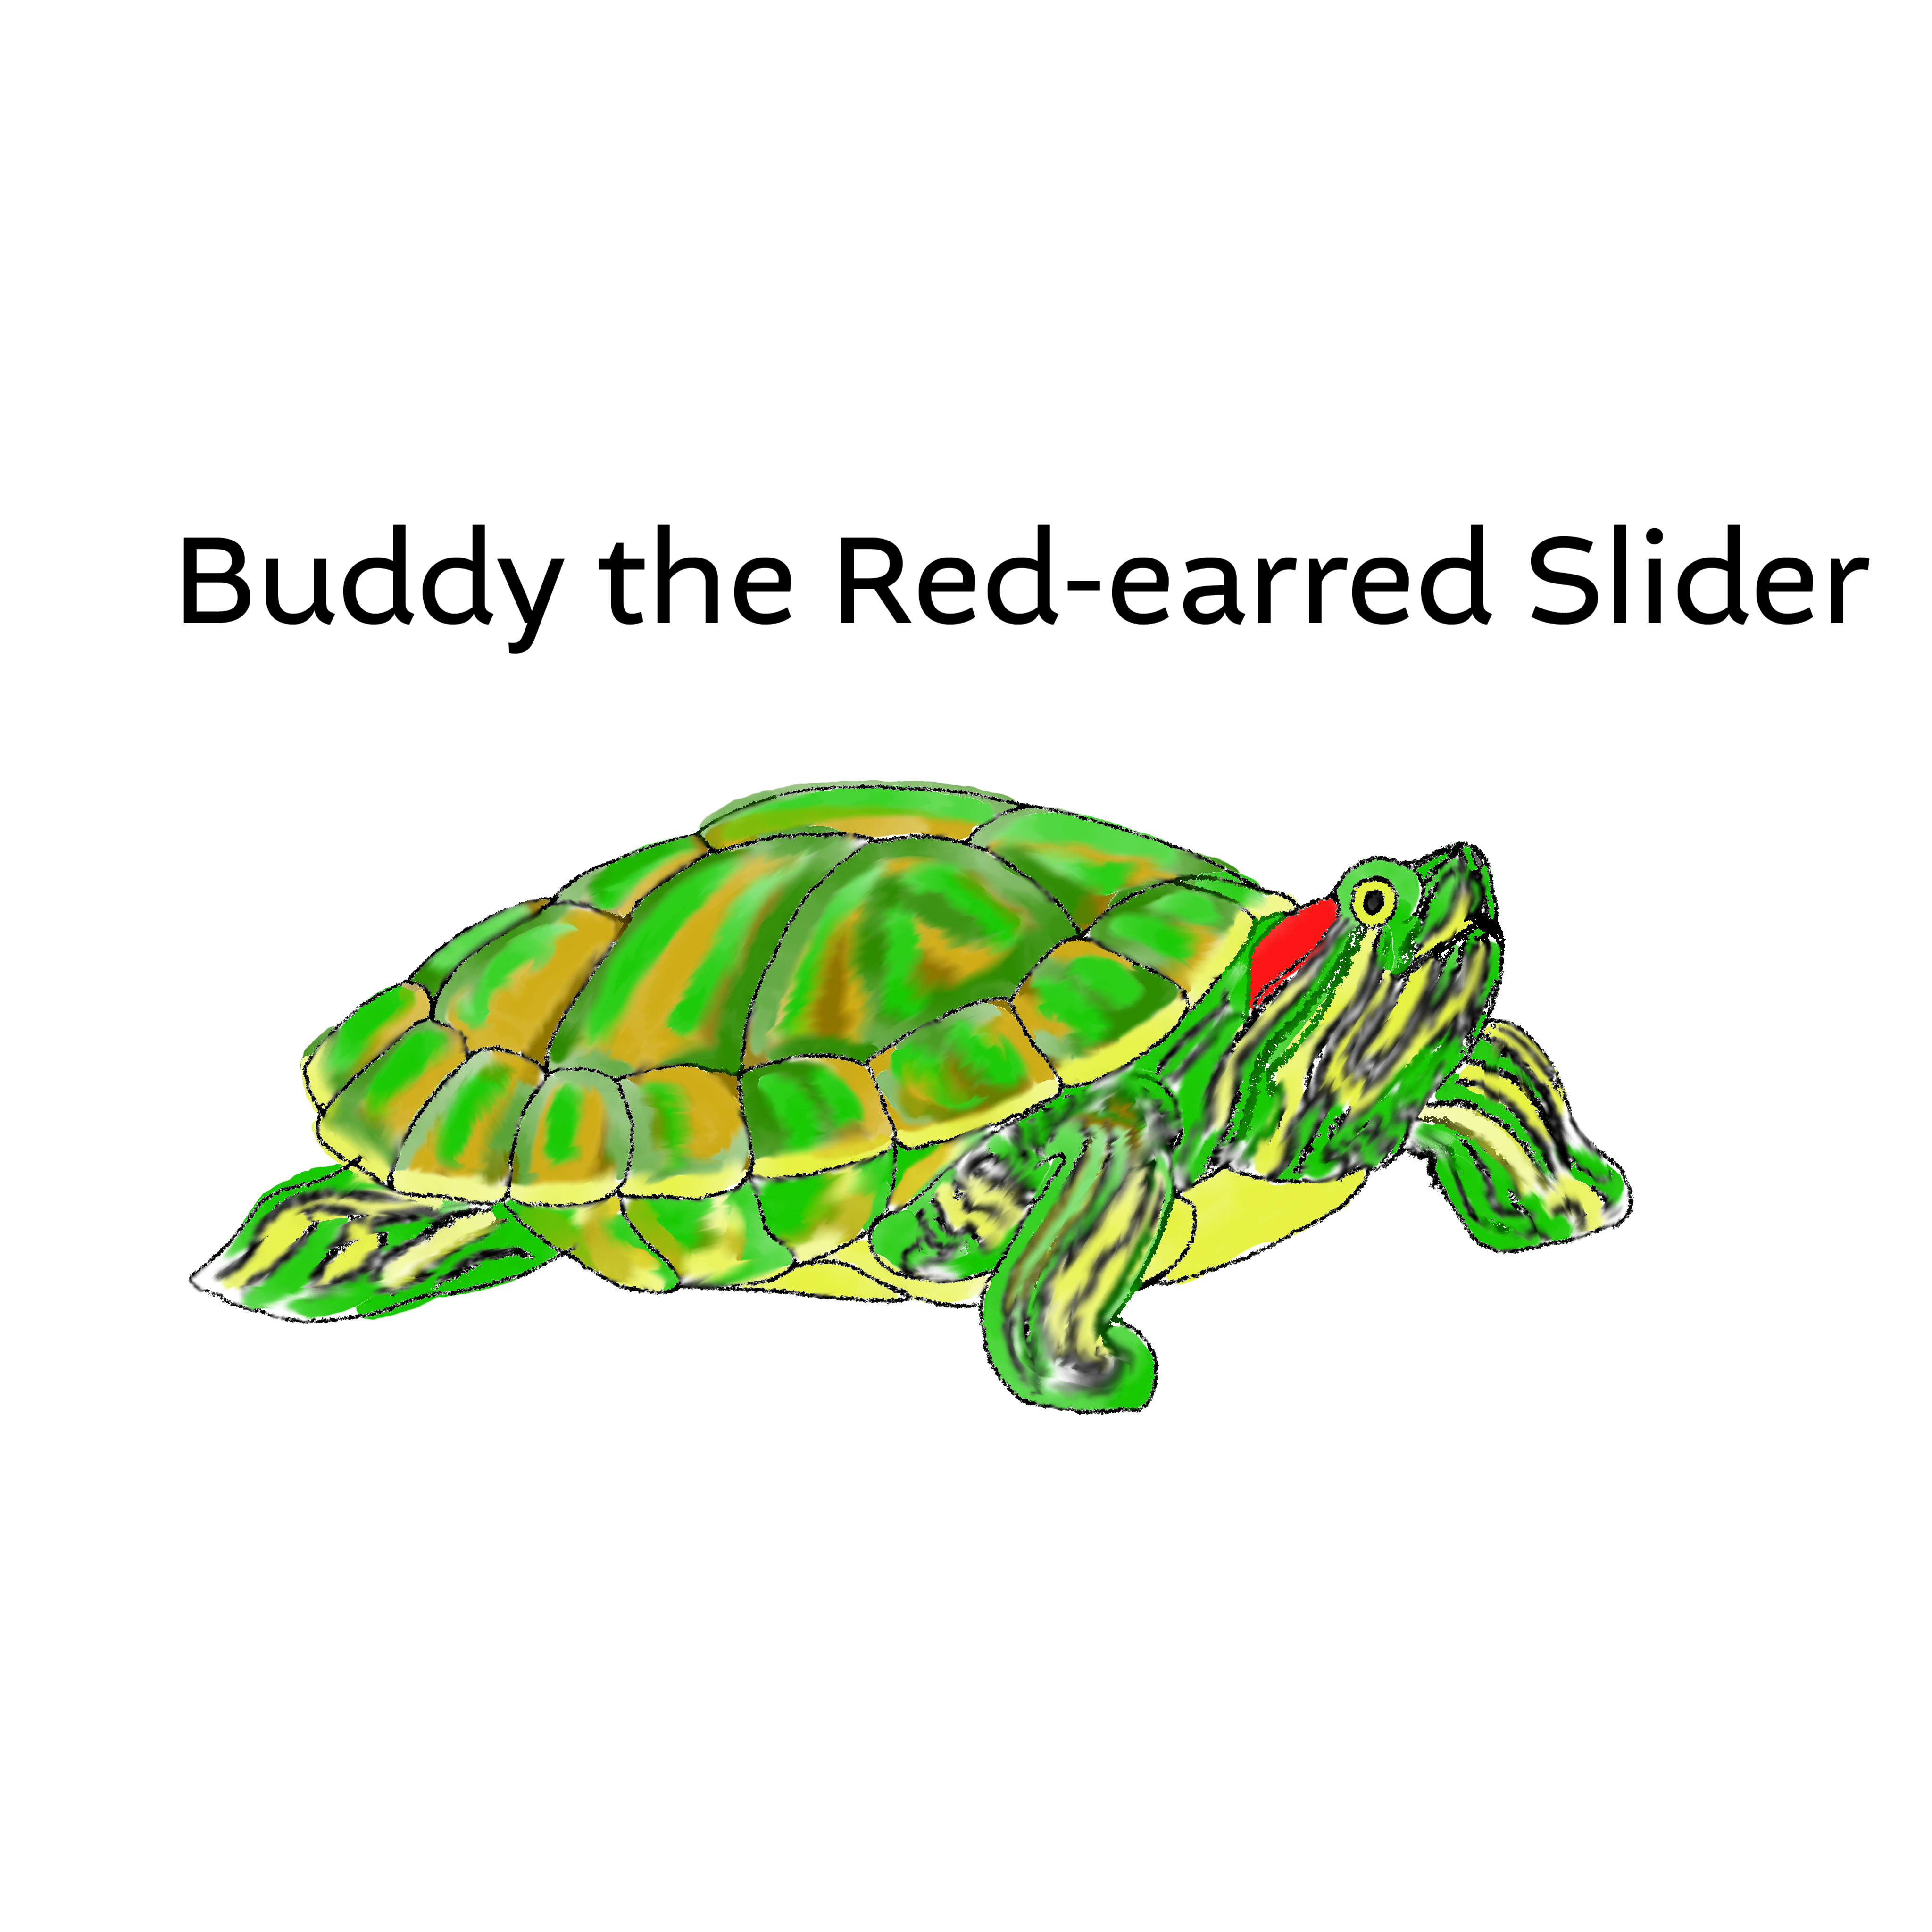 Buddy the Red-eared Slider